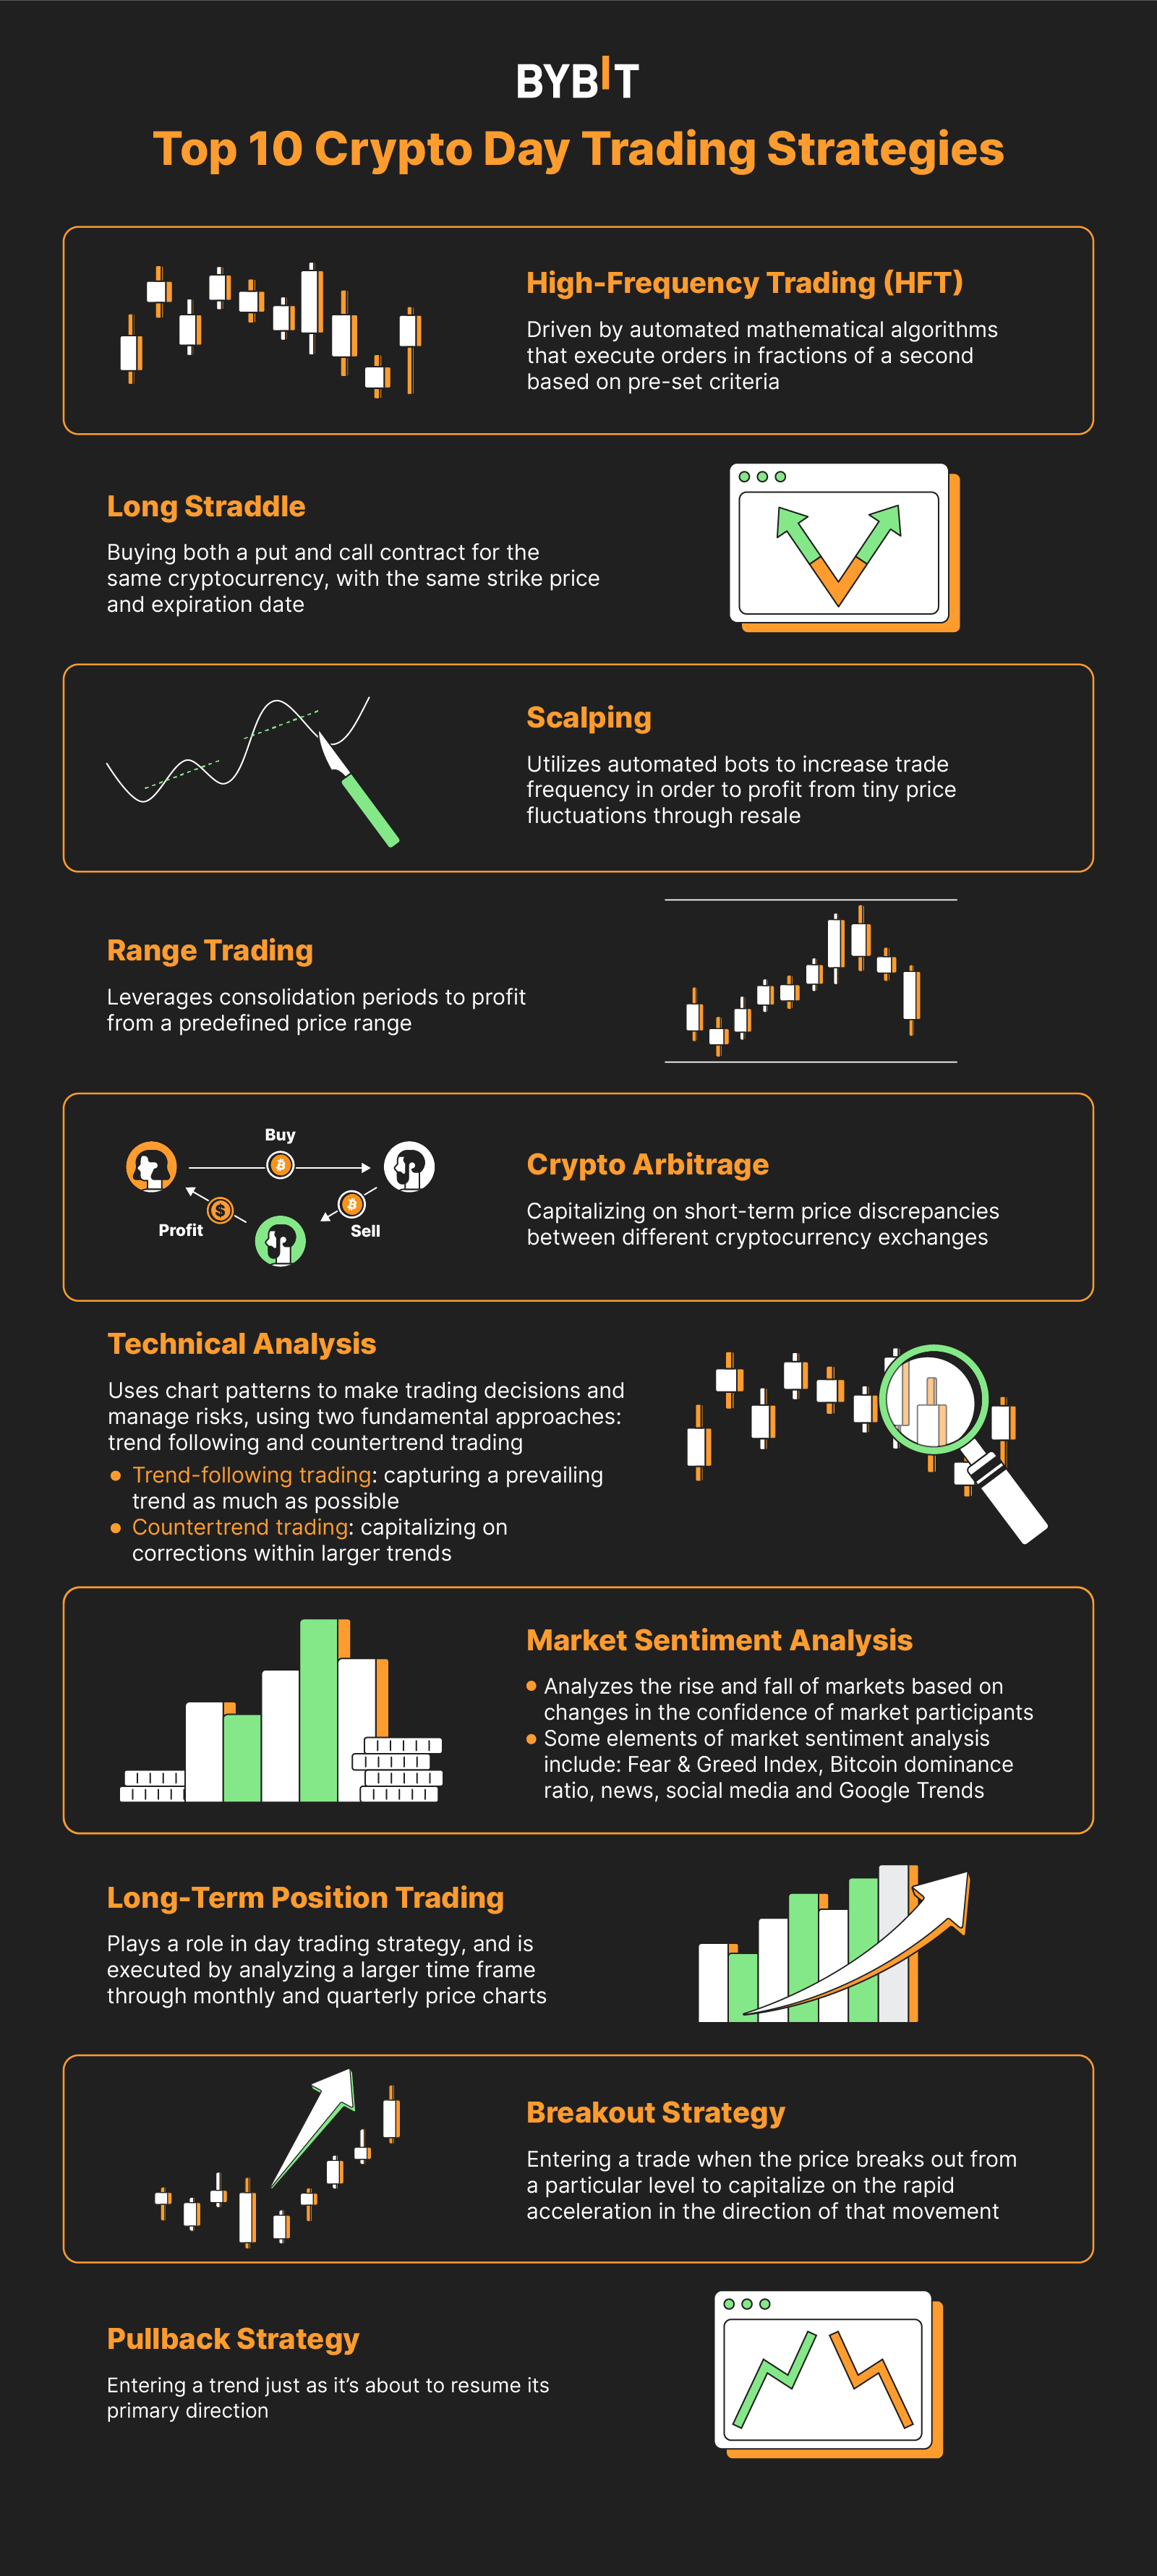 How Spot Trading Works in Crypto